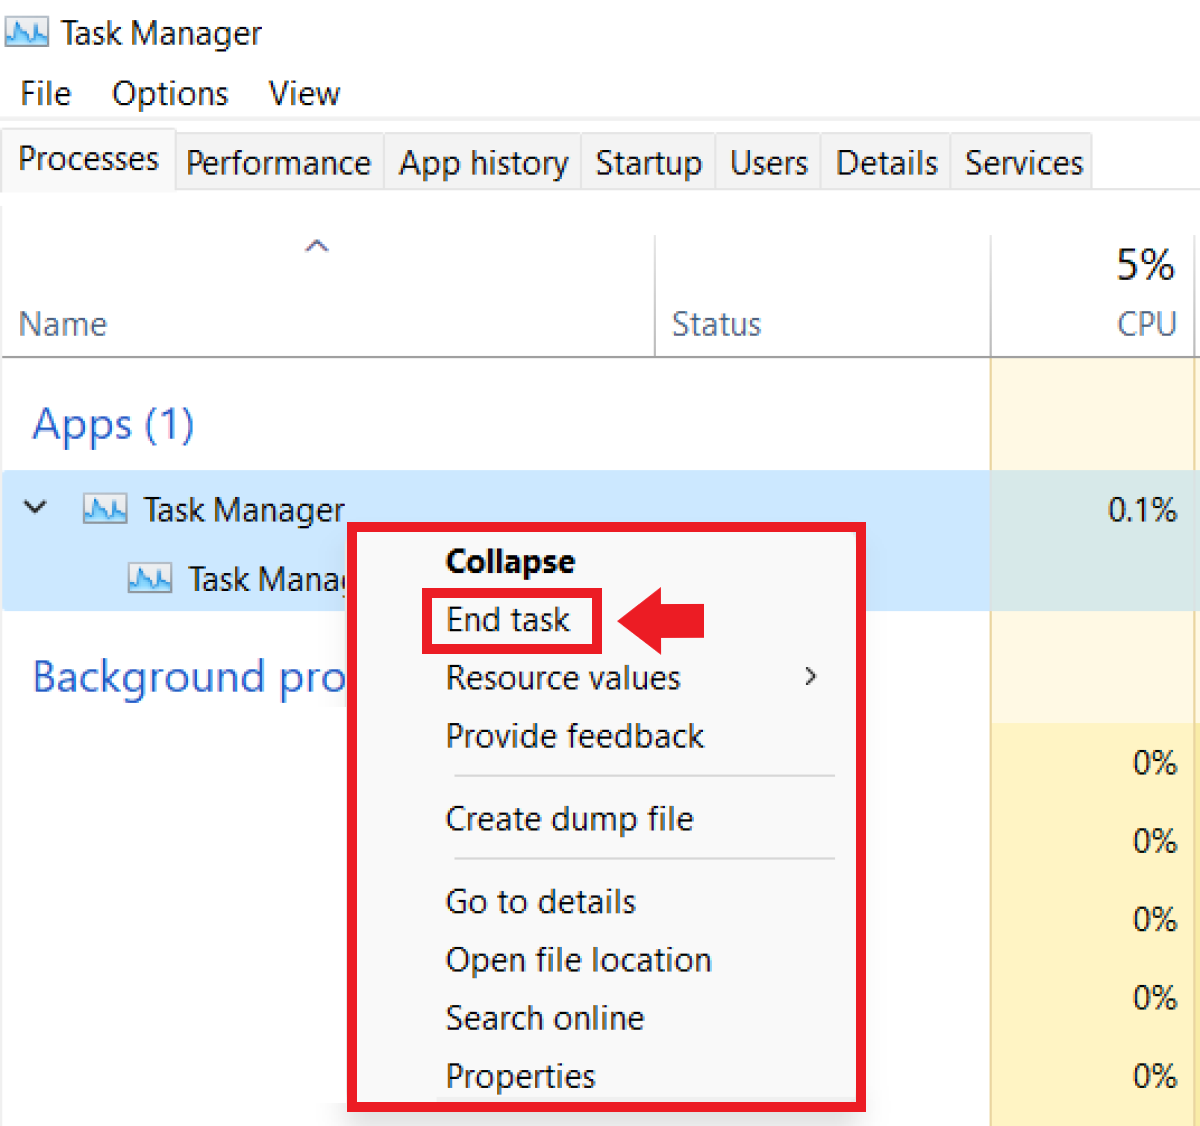 The End task option in the Processes menu of Task Manager